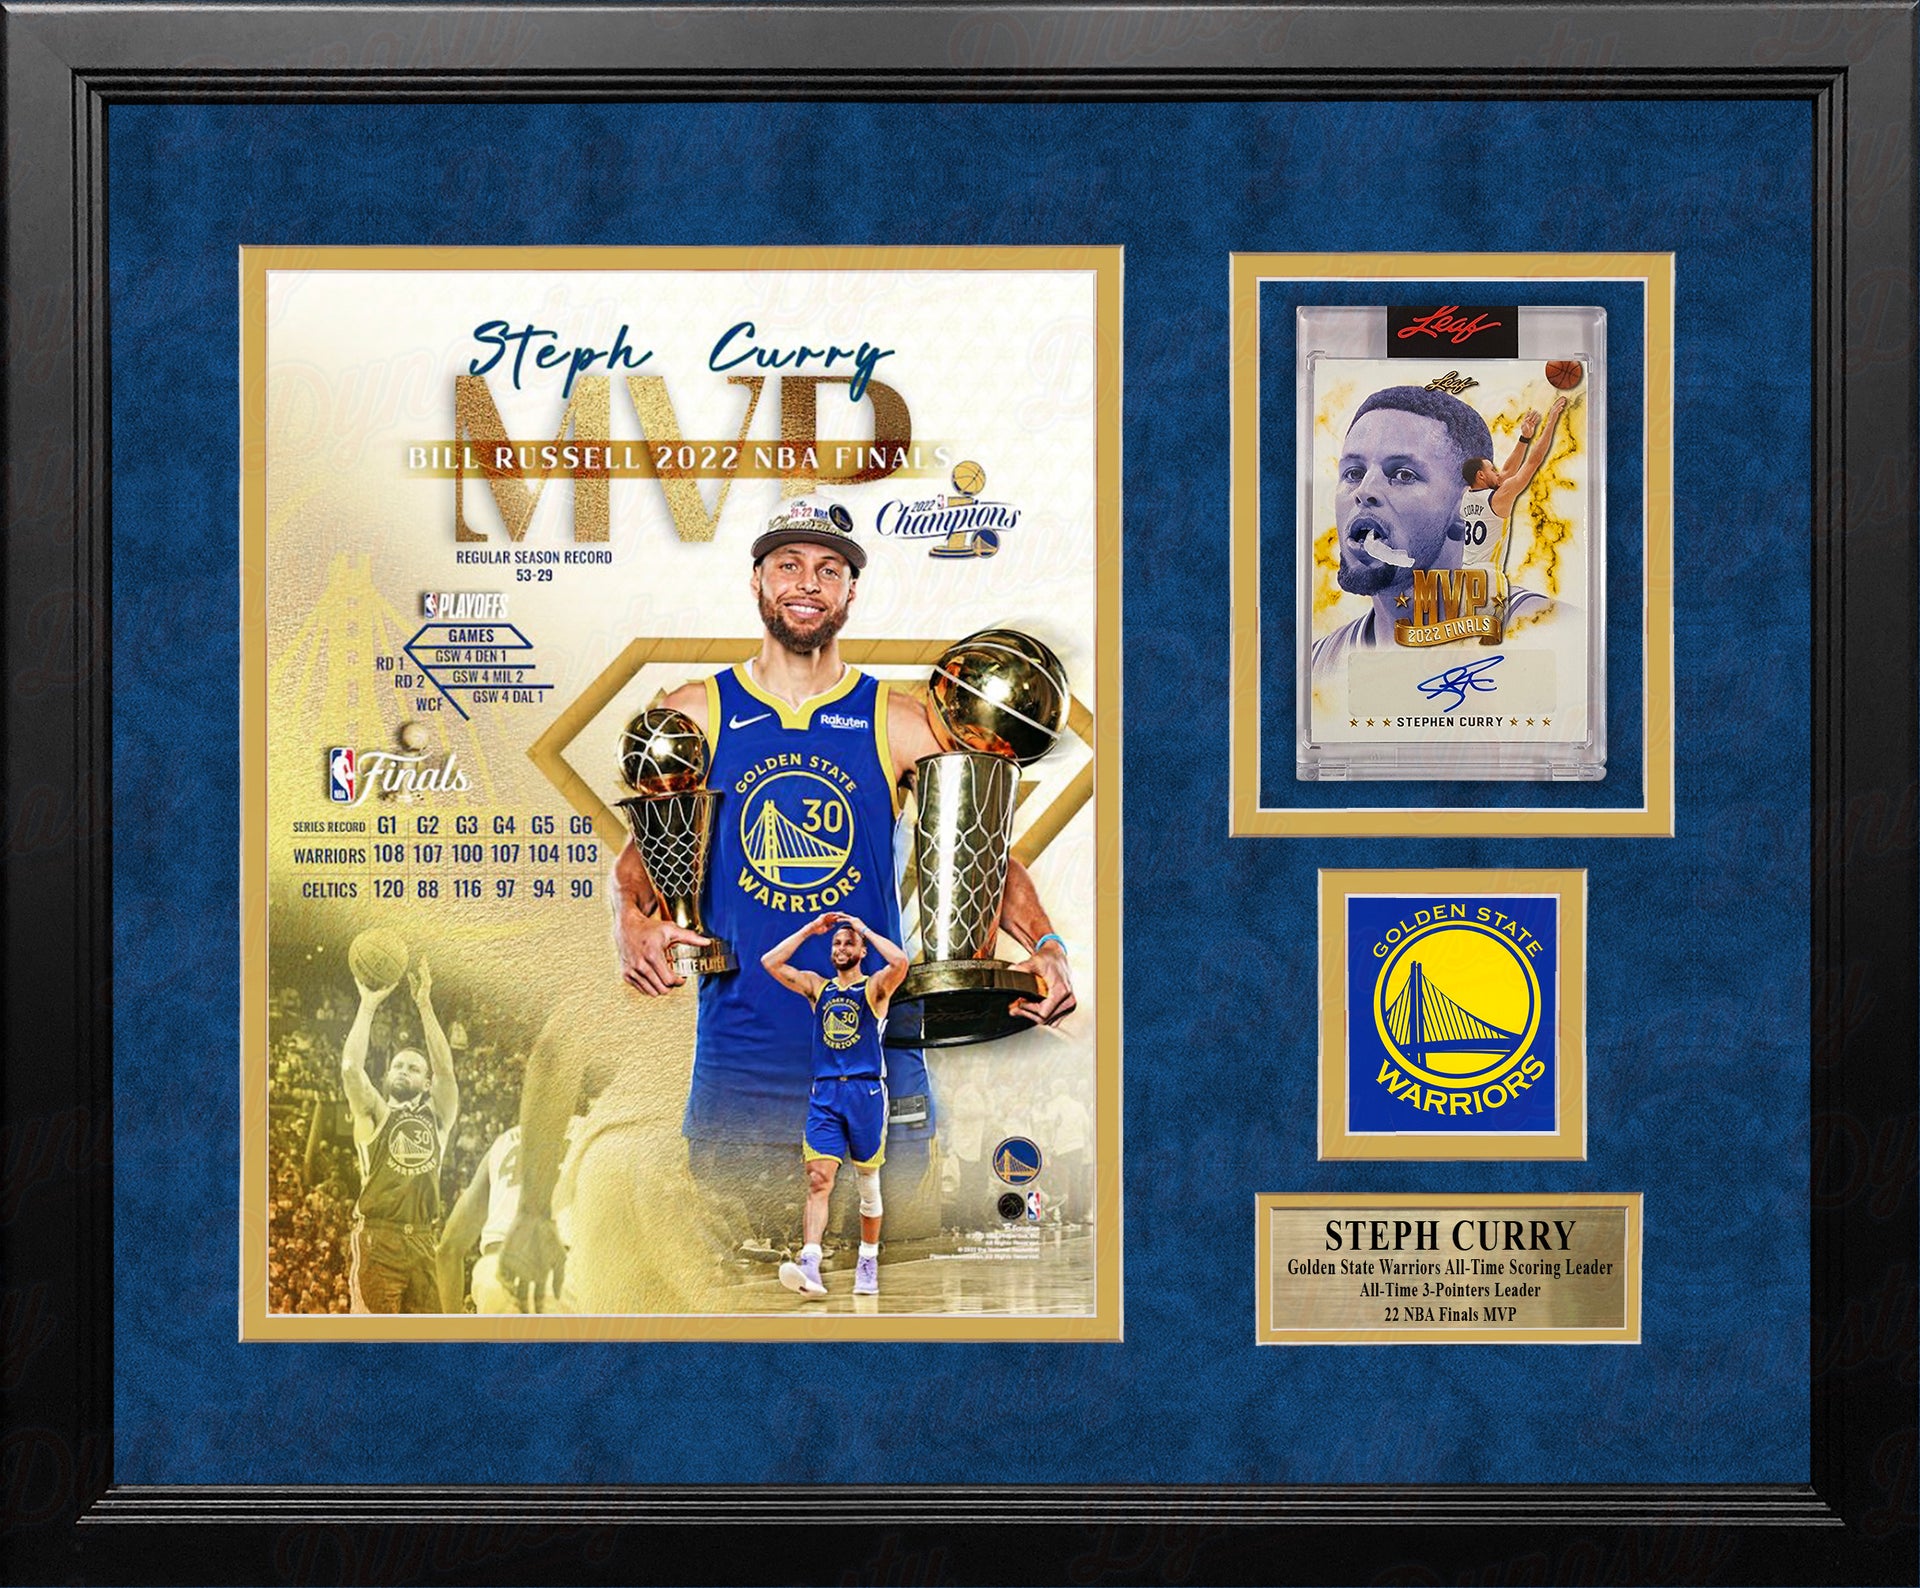 Steph Curry 2022 Finals MVP Photo & Autographed Card Golden State Warriors Framed Basketball Collage - Dynasty Sports & Framing 